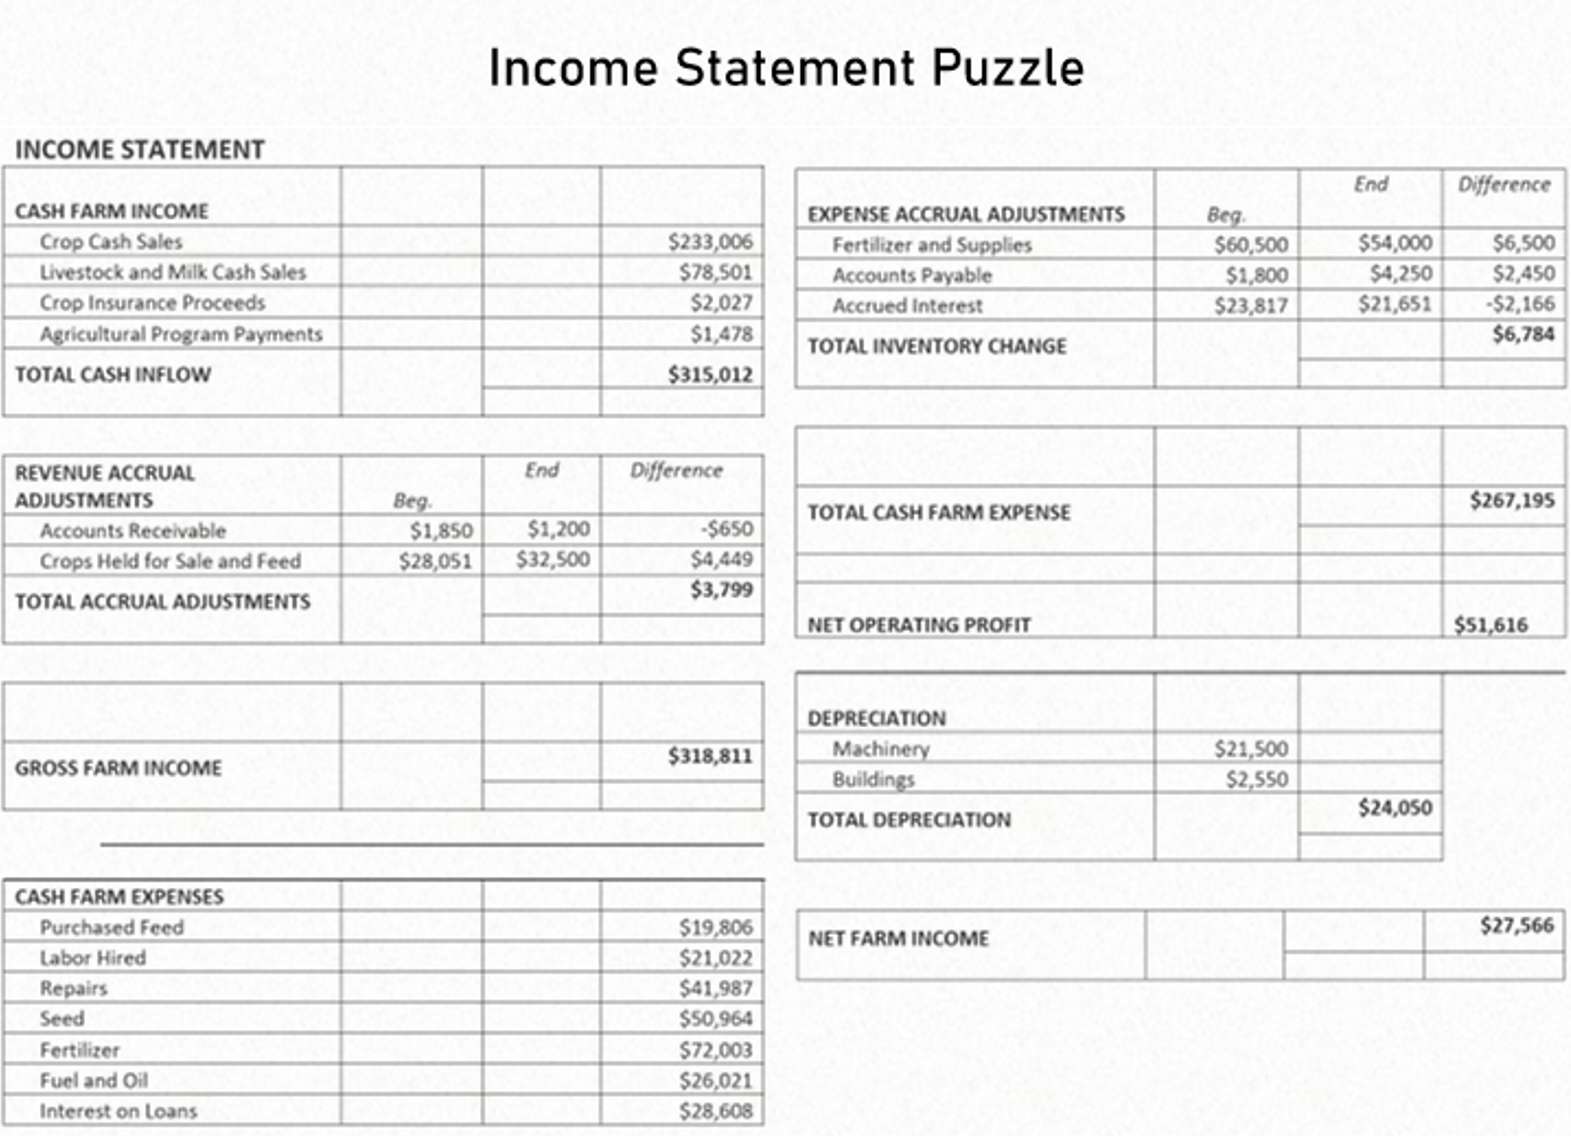 Income Statement online puzzle